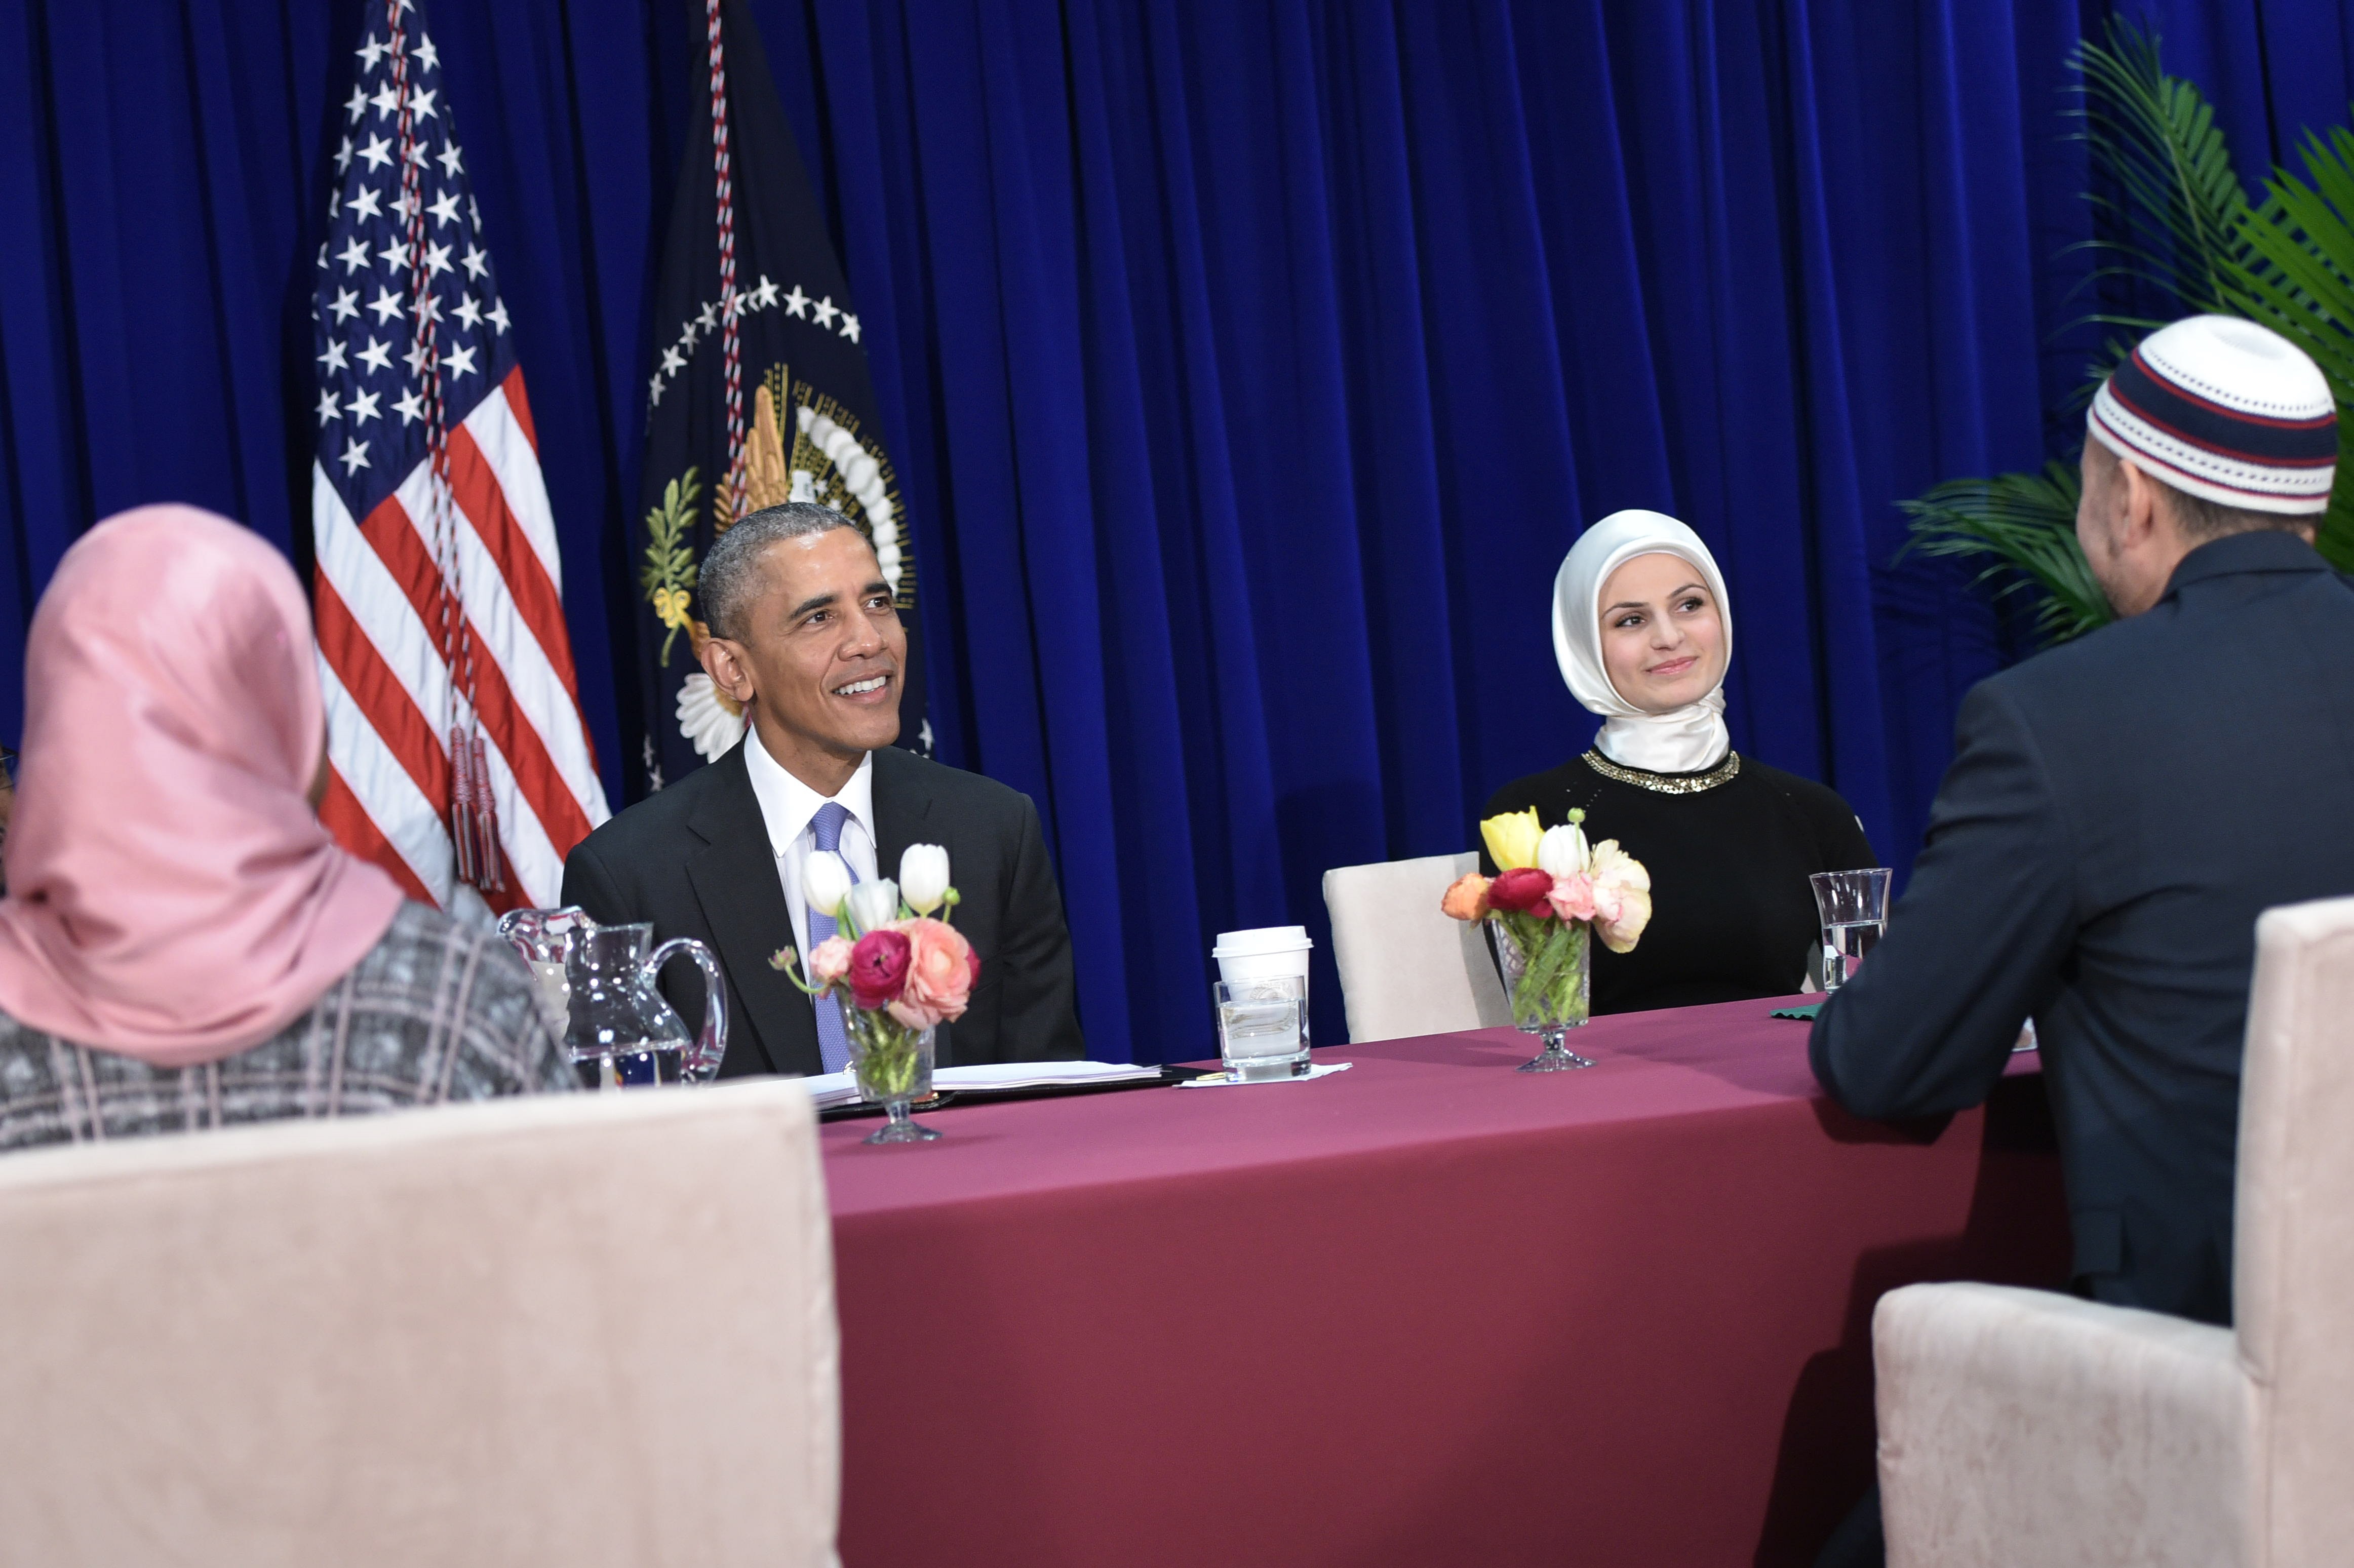 US President Barack Obama participates in a roundtable discussion with members of the Muslim community while visiting the Islamic Society of Baltimore February 3, 2016 in Windsor Mill, Maryland.  Seven years into his presidency, Barack Obama made his first trip to an American mosque on February 4, offering a high-profile rebuttal of harsh Republican election-year rhetoric against Muslims.   / AFP / MANDEL NGAN        (Photo credit should read MANDEL NGAN/AFP/Getty Images)